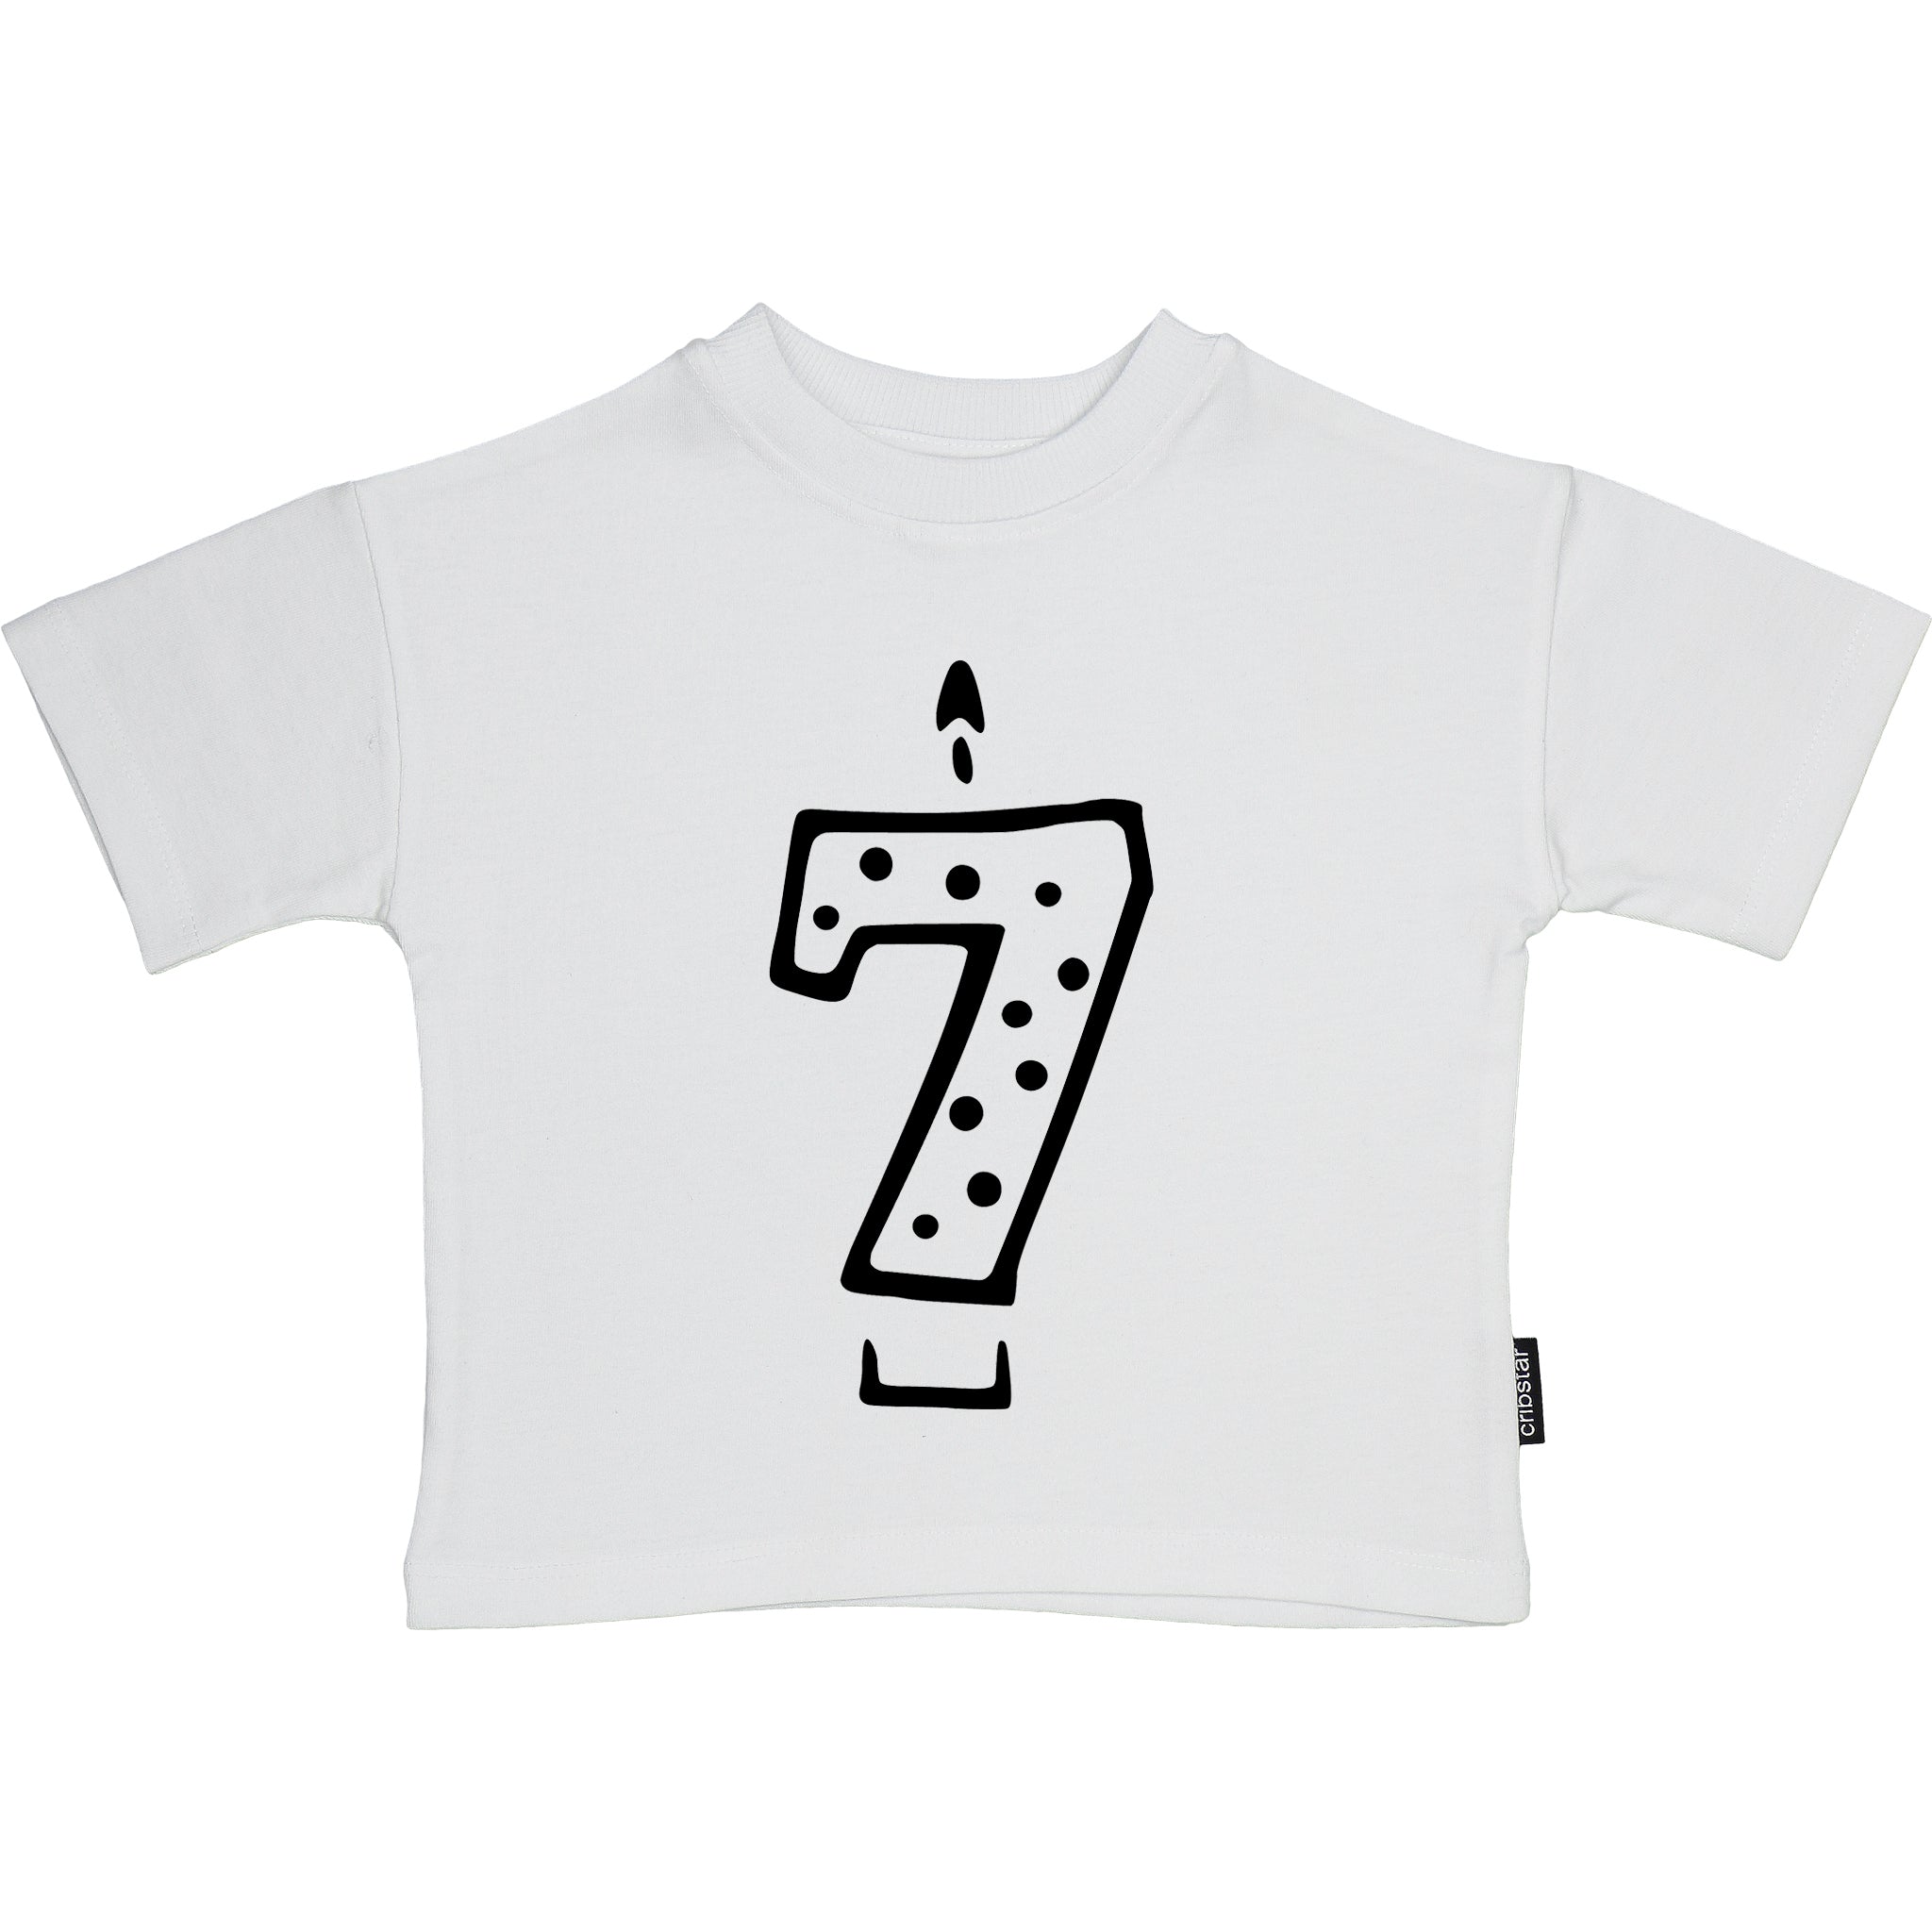 7 Candle T-shirt - White